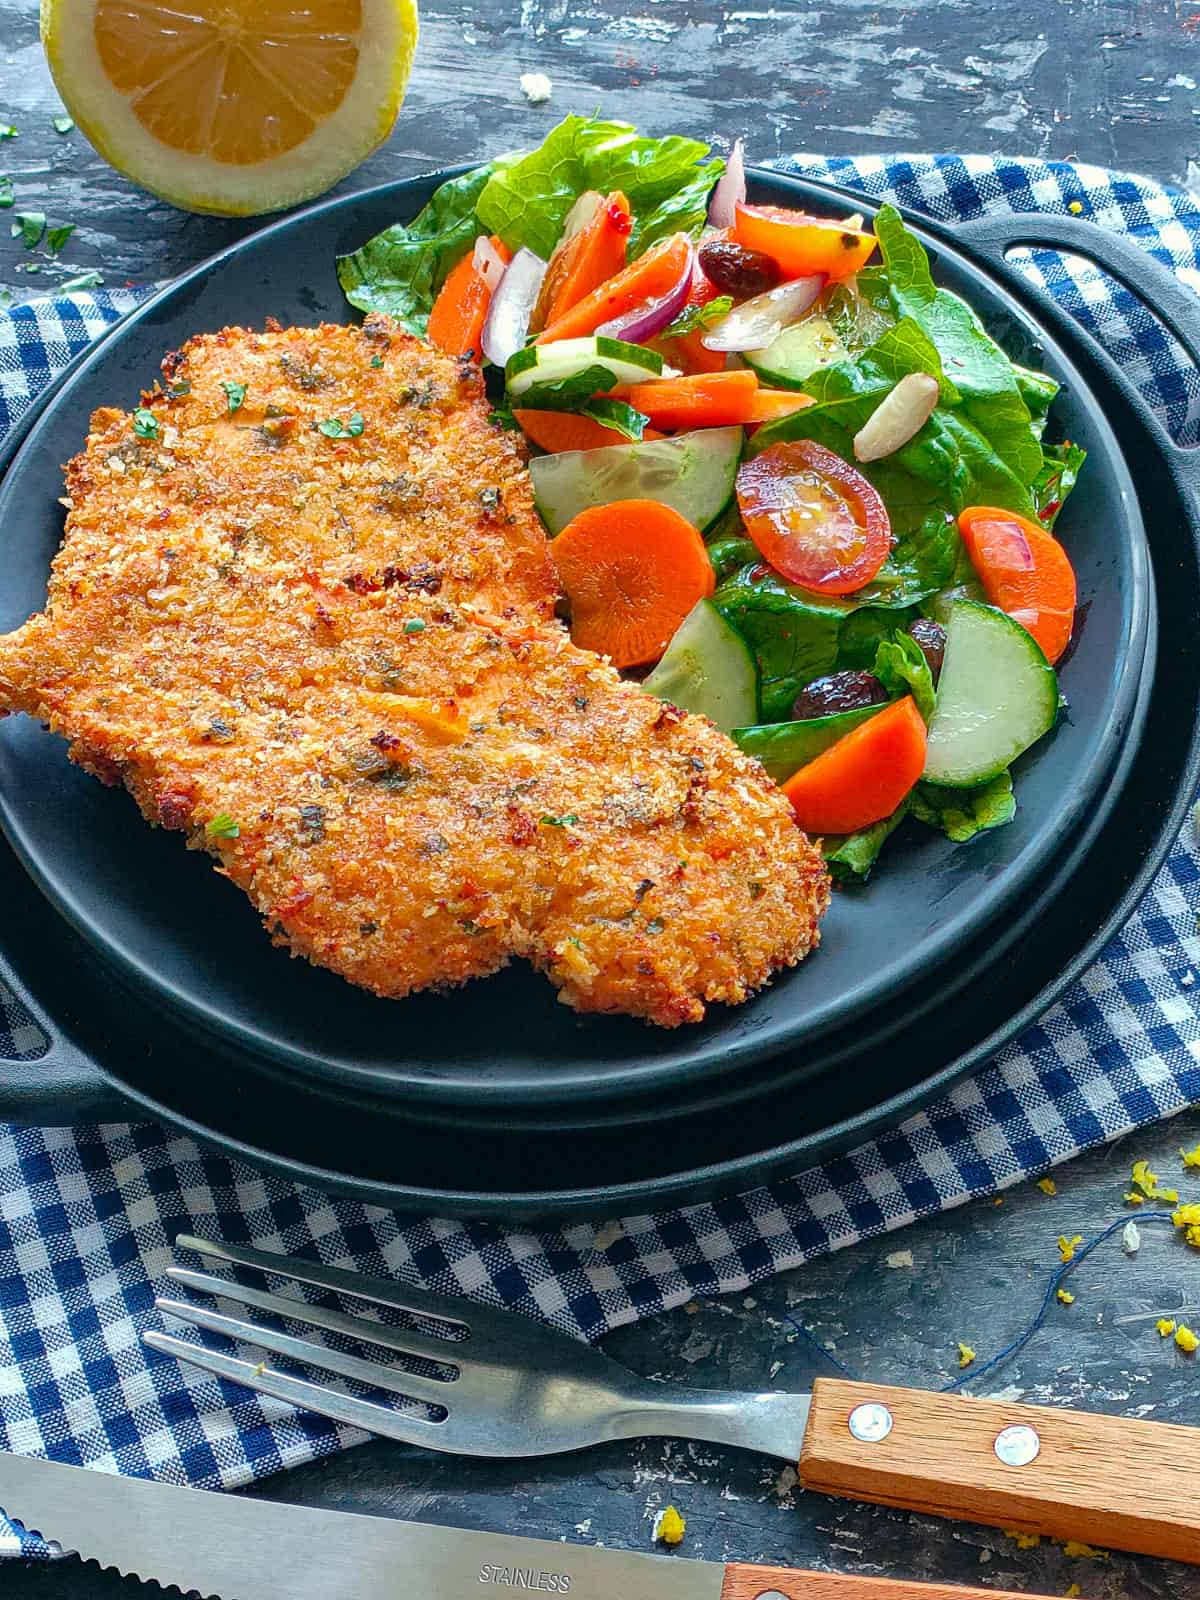 Baked Panko chicken breasts with vegetable salad on a black plate.